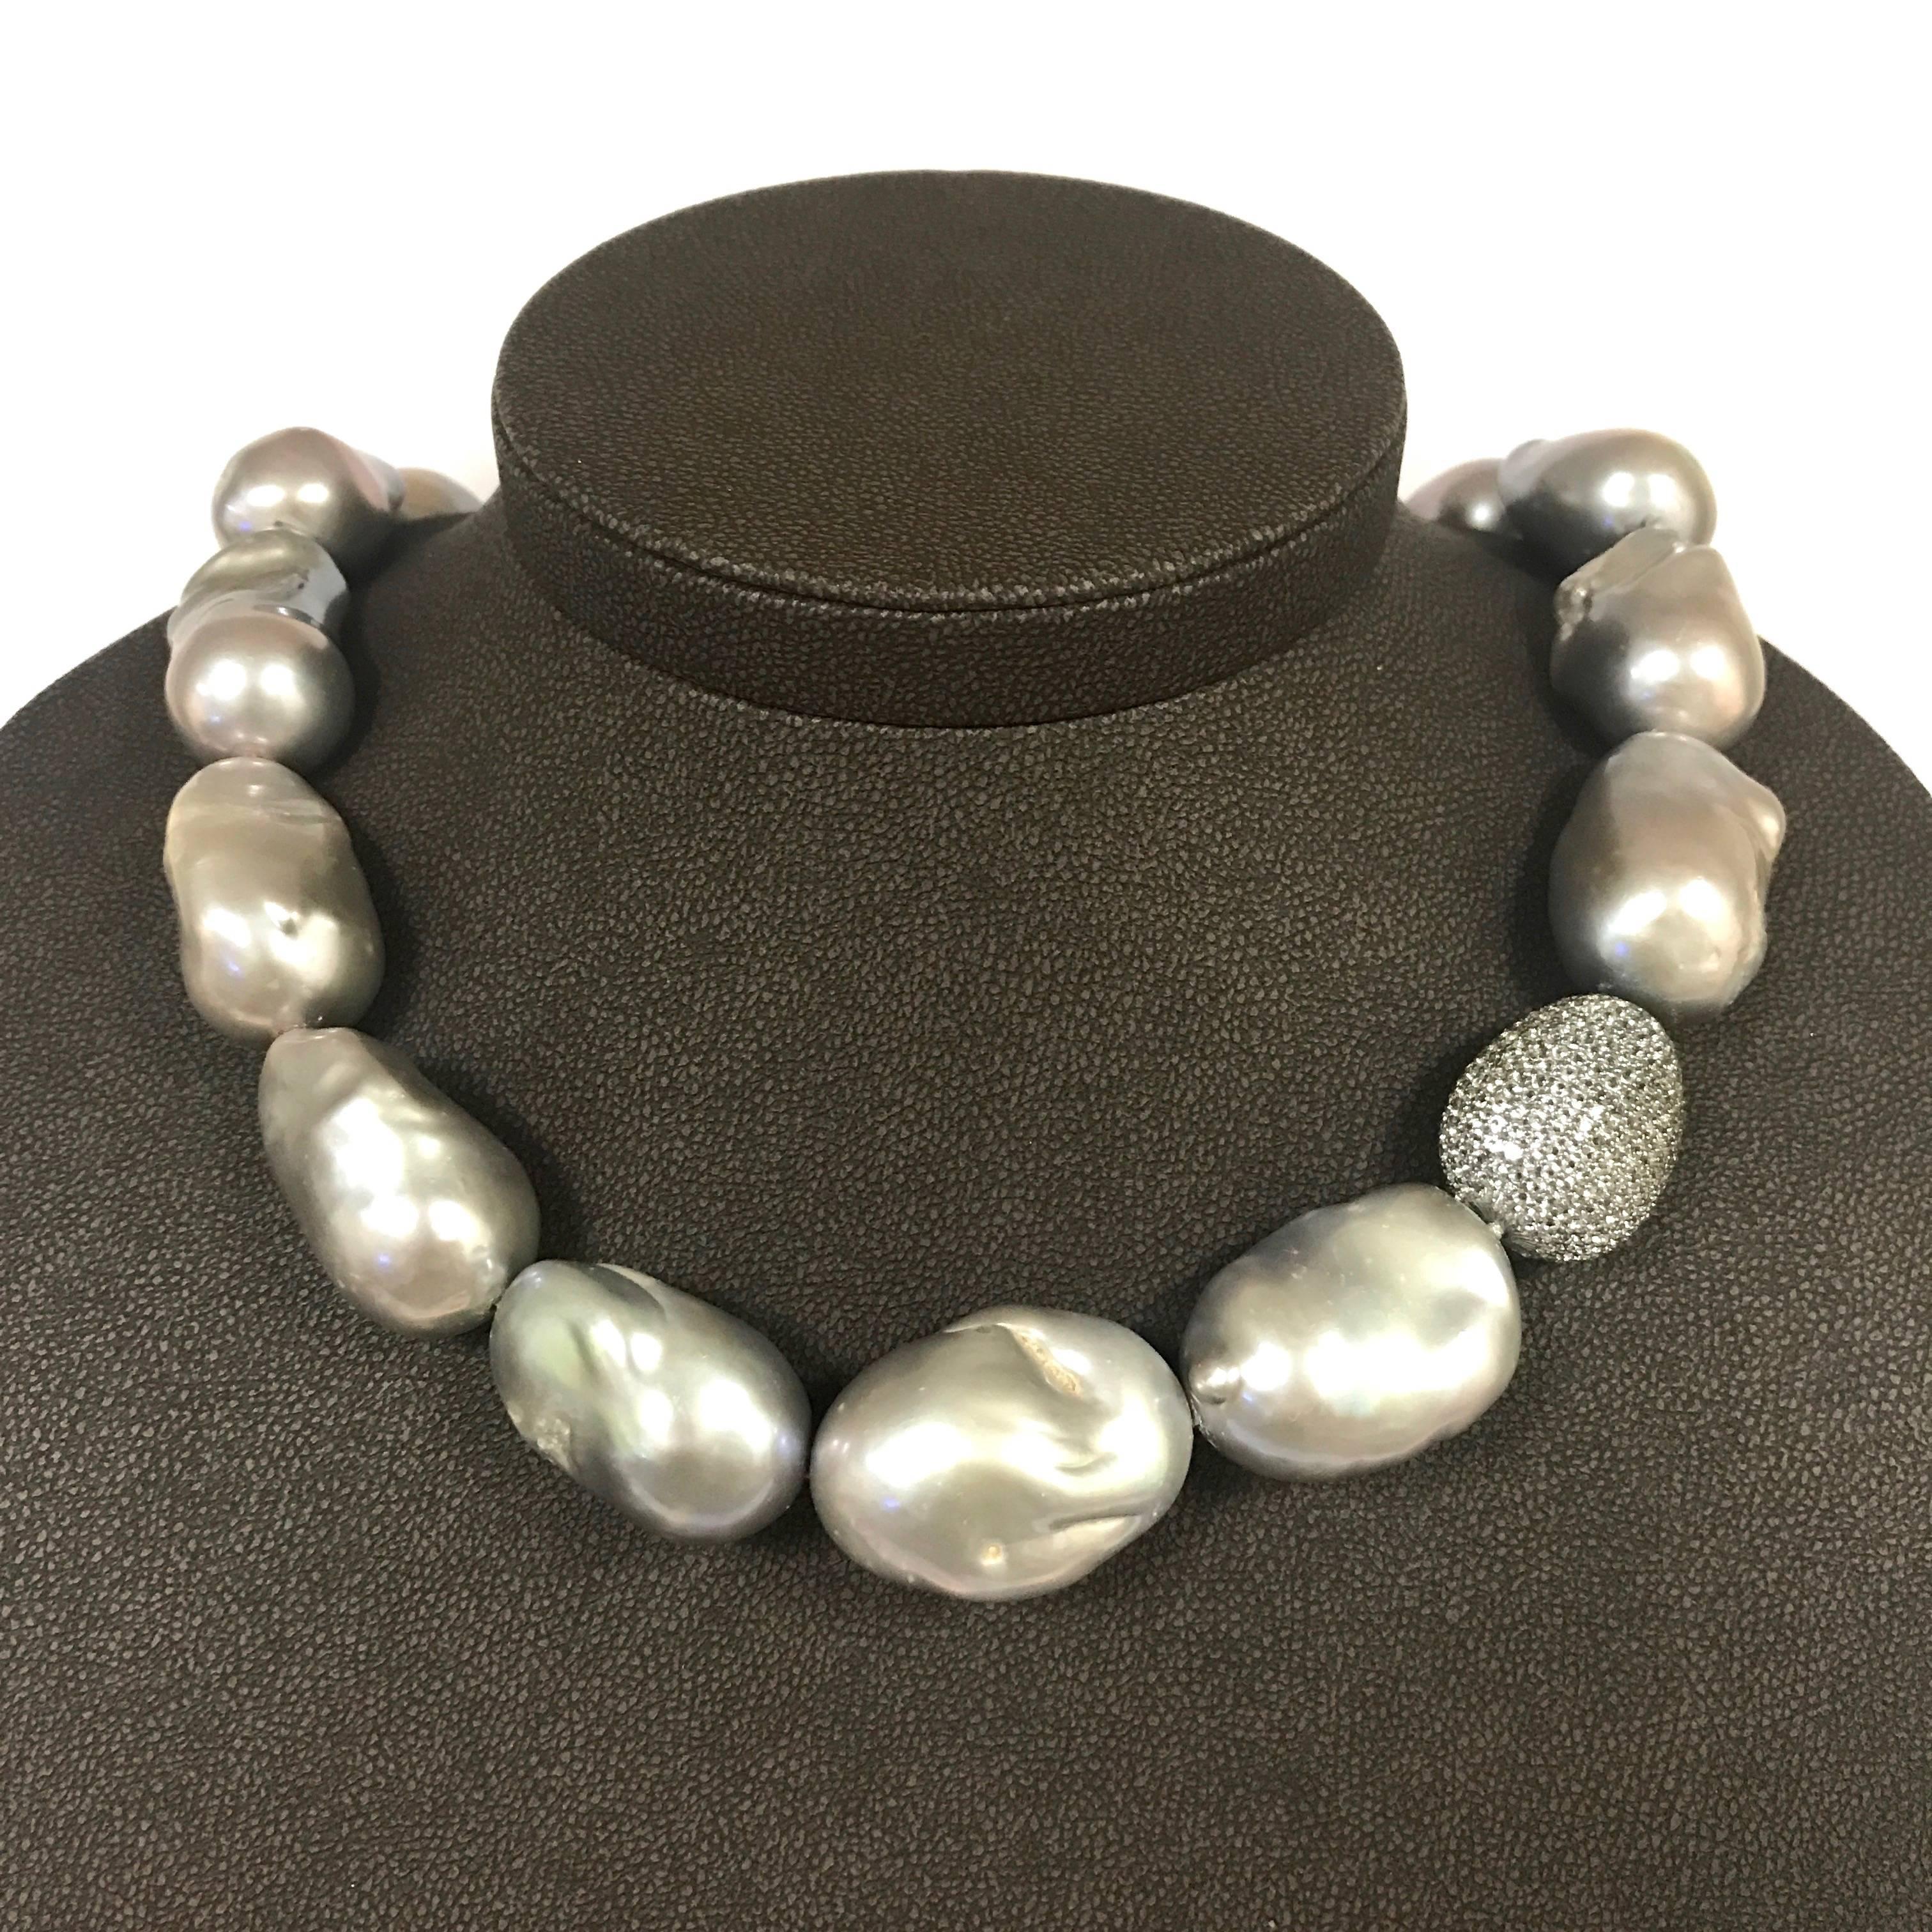 Topaz and Grey Sky Cultured Baroque Pearls Necklace.
Topaz
Grey Sky Cultured Baroque Pearls